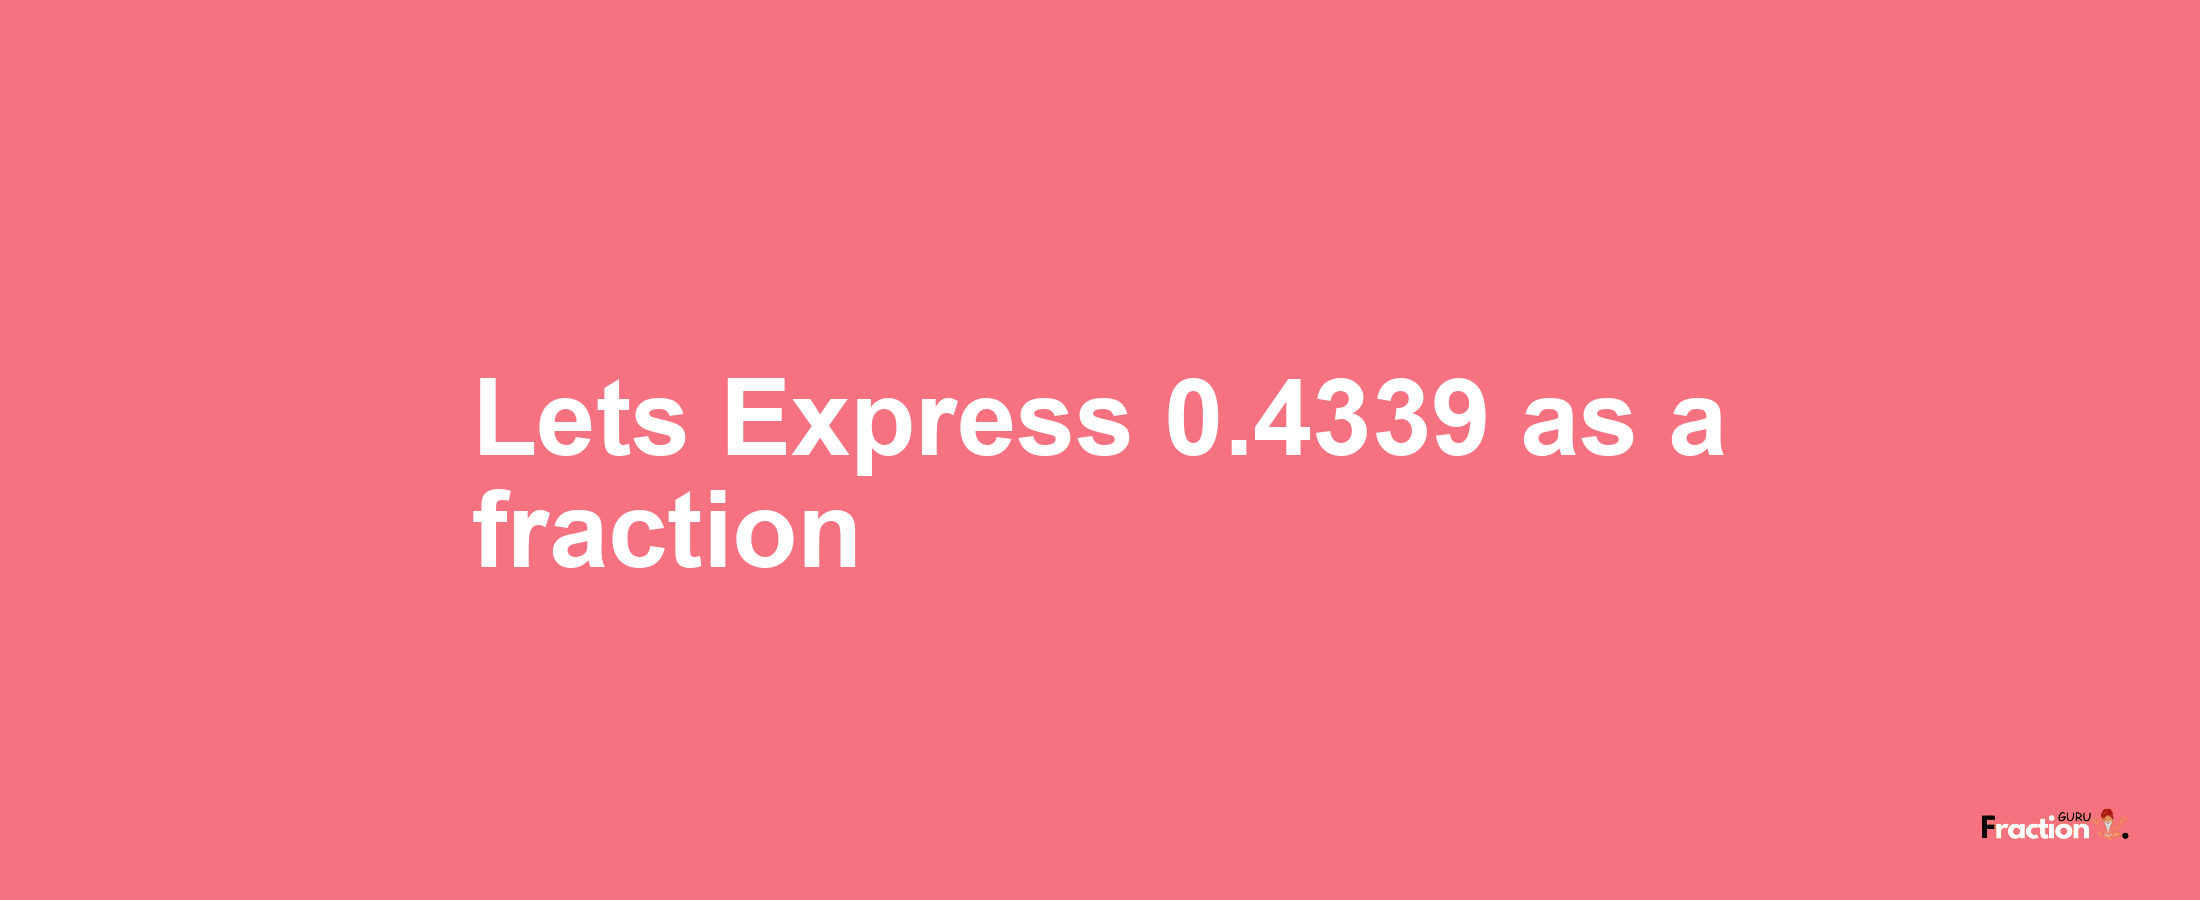 Lets Express 0.4339 as afraction